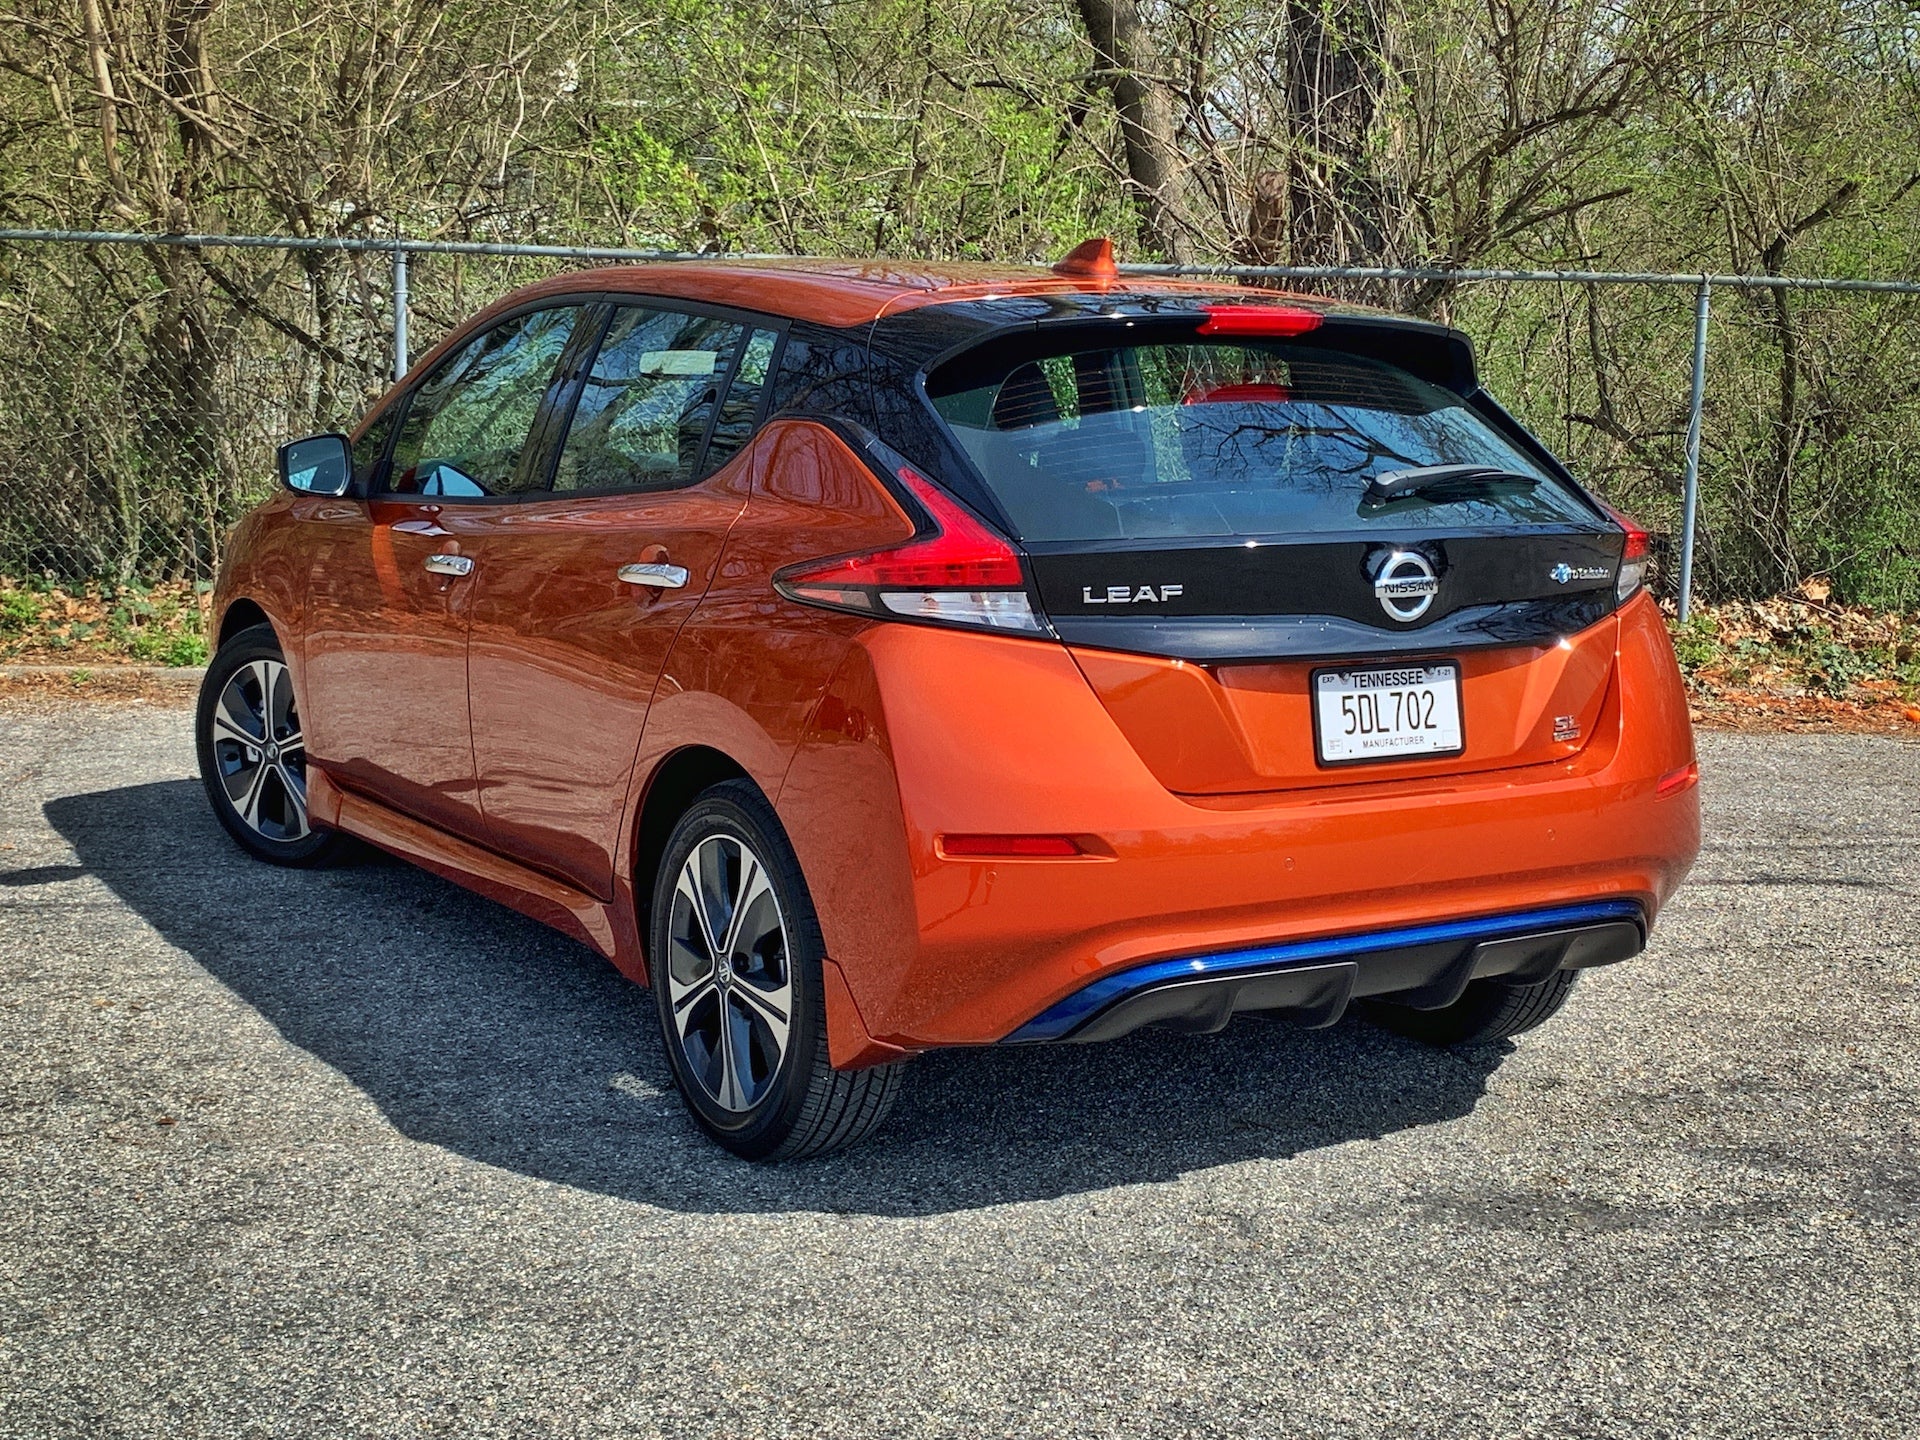 2021 Nissan Leaf Review: Don't Get the Most Expensive One | The Drive